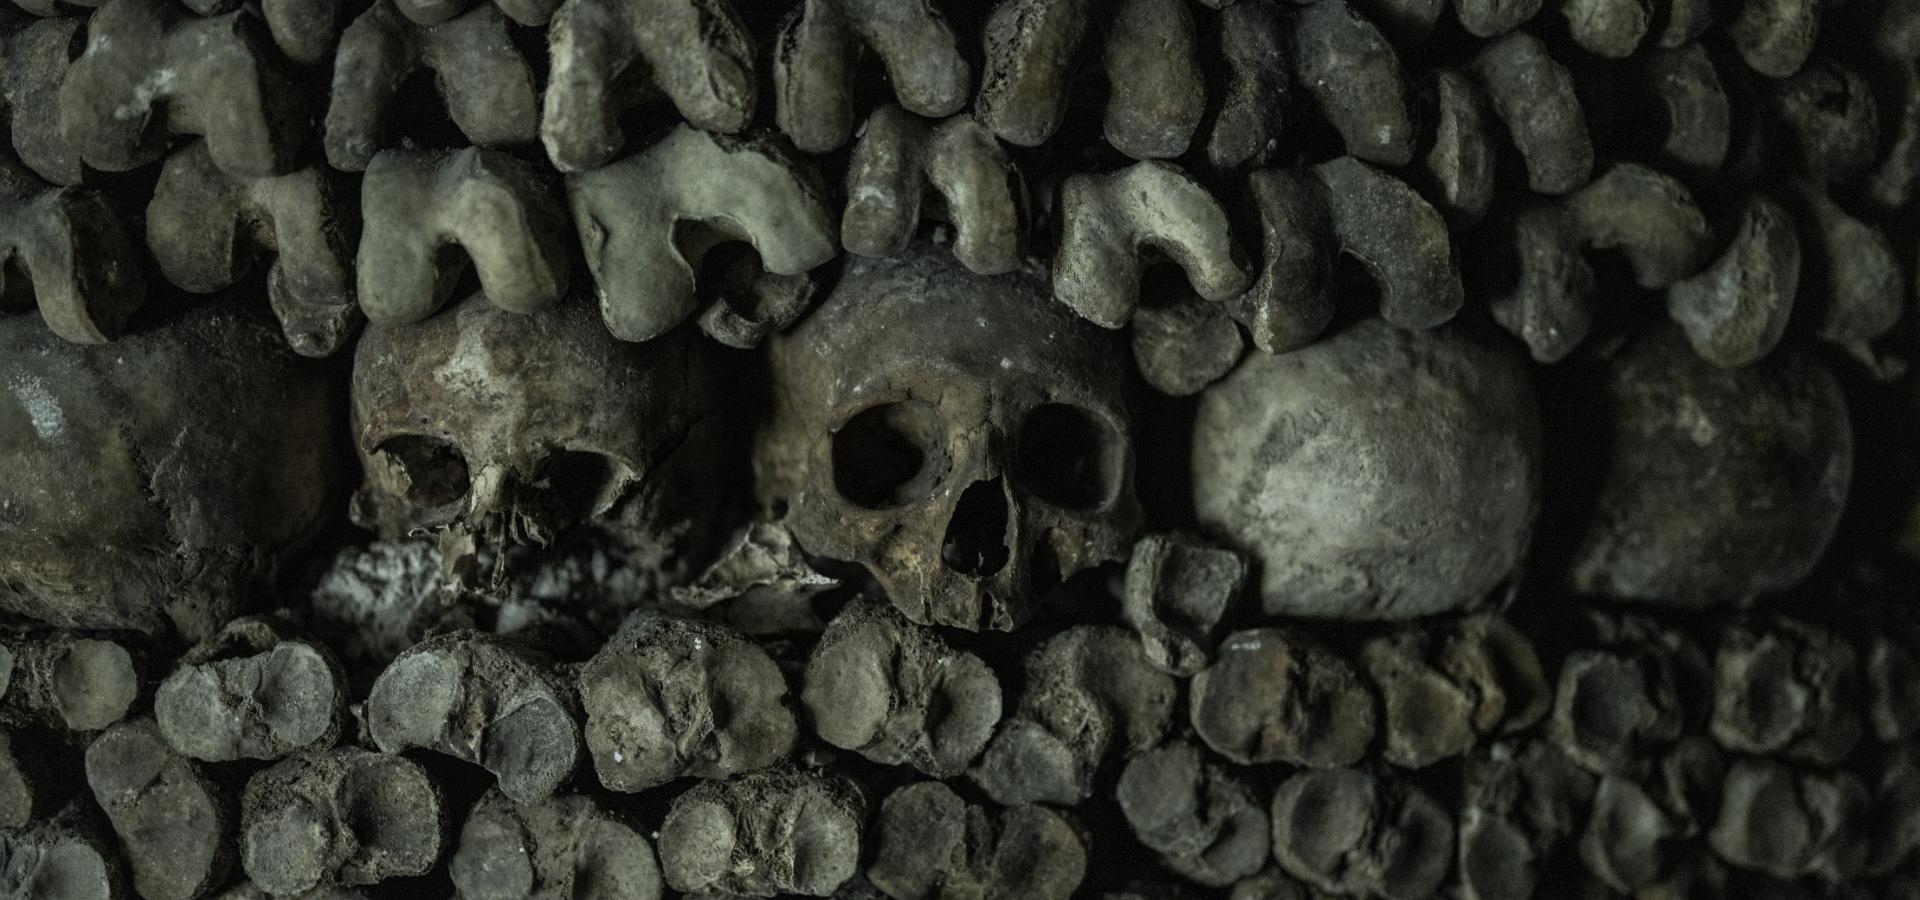 A still image from the Catacombs of Paris featured in Daryl Dixon